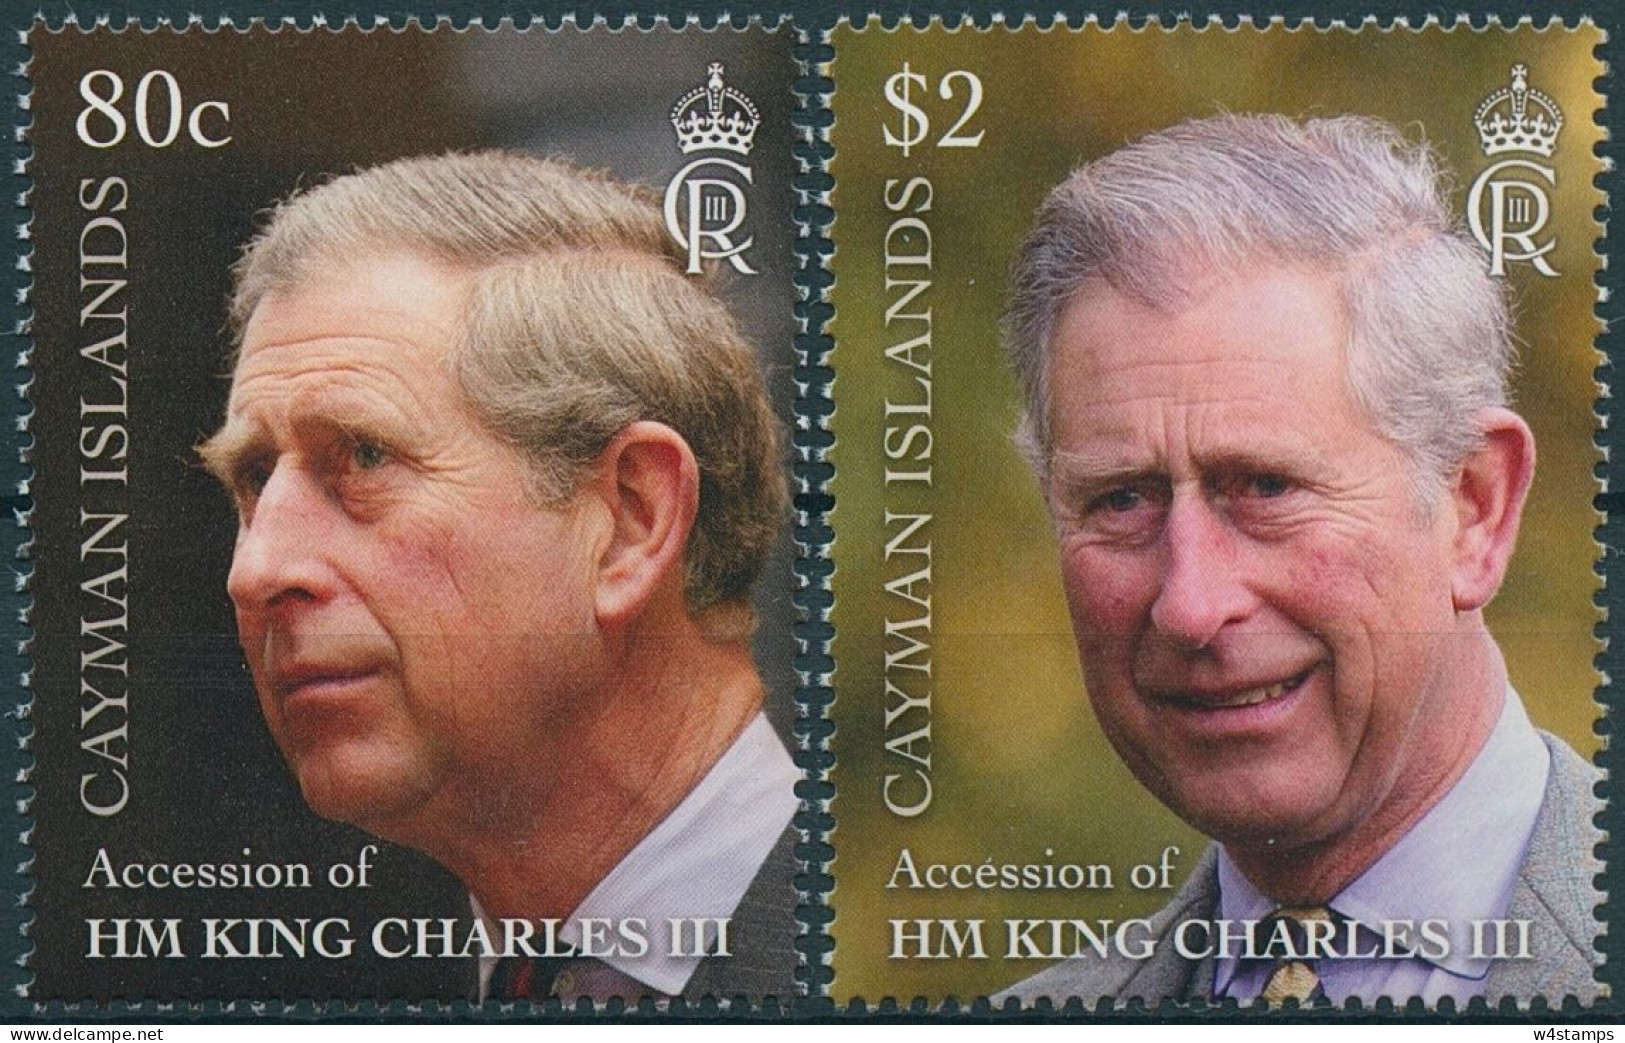 Cayman Islands 2023 MNH Royalty Stamps Queen Elizabeth II Cayman Islands 2023 MNH Royalty Stamps King Charles III 1v M/S - Cayman Islands